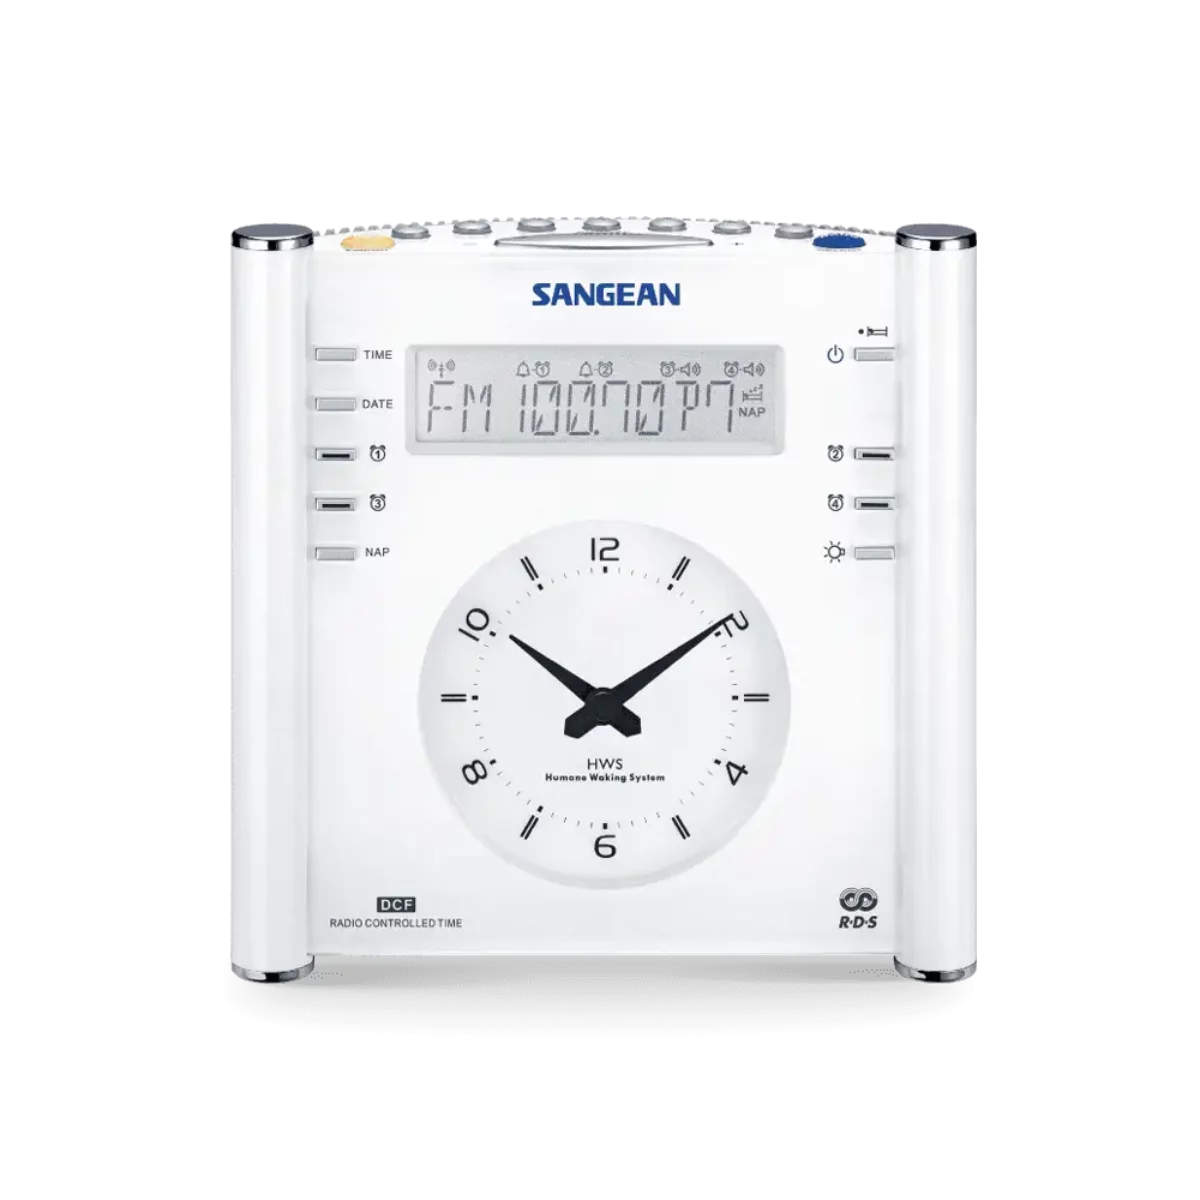 Sangean RCR-3 AM / FM-RBDS / AUX-In Tuning Radio front view with display and clock